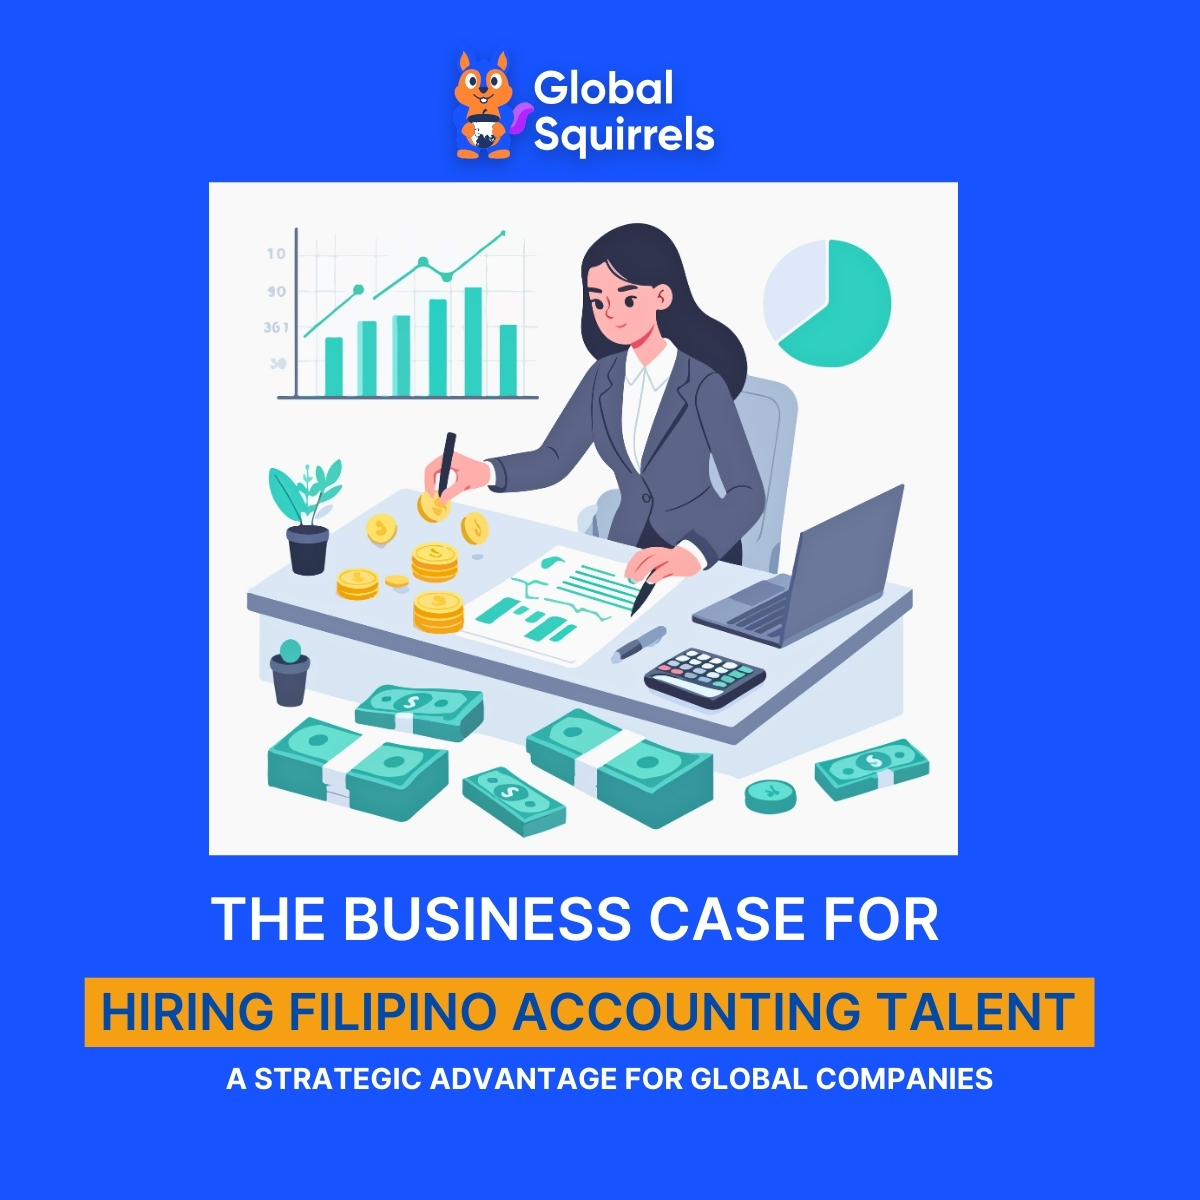 Maximize your business potential with top-tier Filipino accounting talent through Global Squirrels! 🌍📊
Read the blog to know more : bit.ly/3JSCO3i

#Globalsquirrels #GlobalAccounting #PhilippinesTalent #BusinessGrowth  #CostEffective #FinancialExpertise #Saasplatform